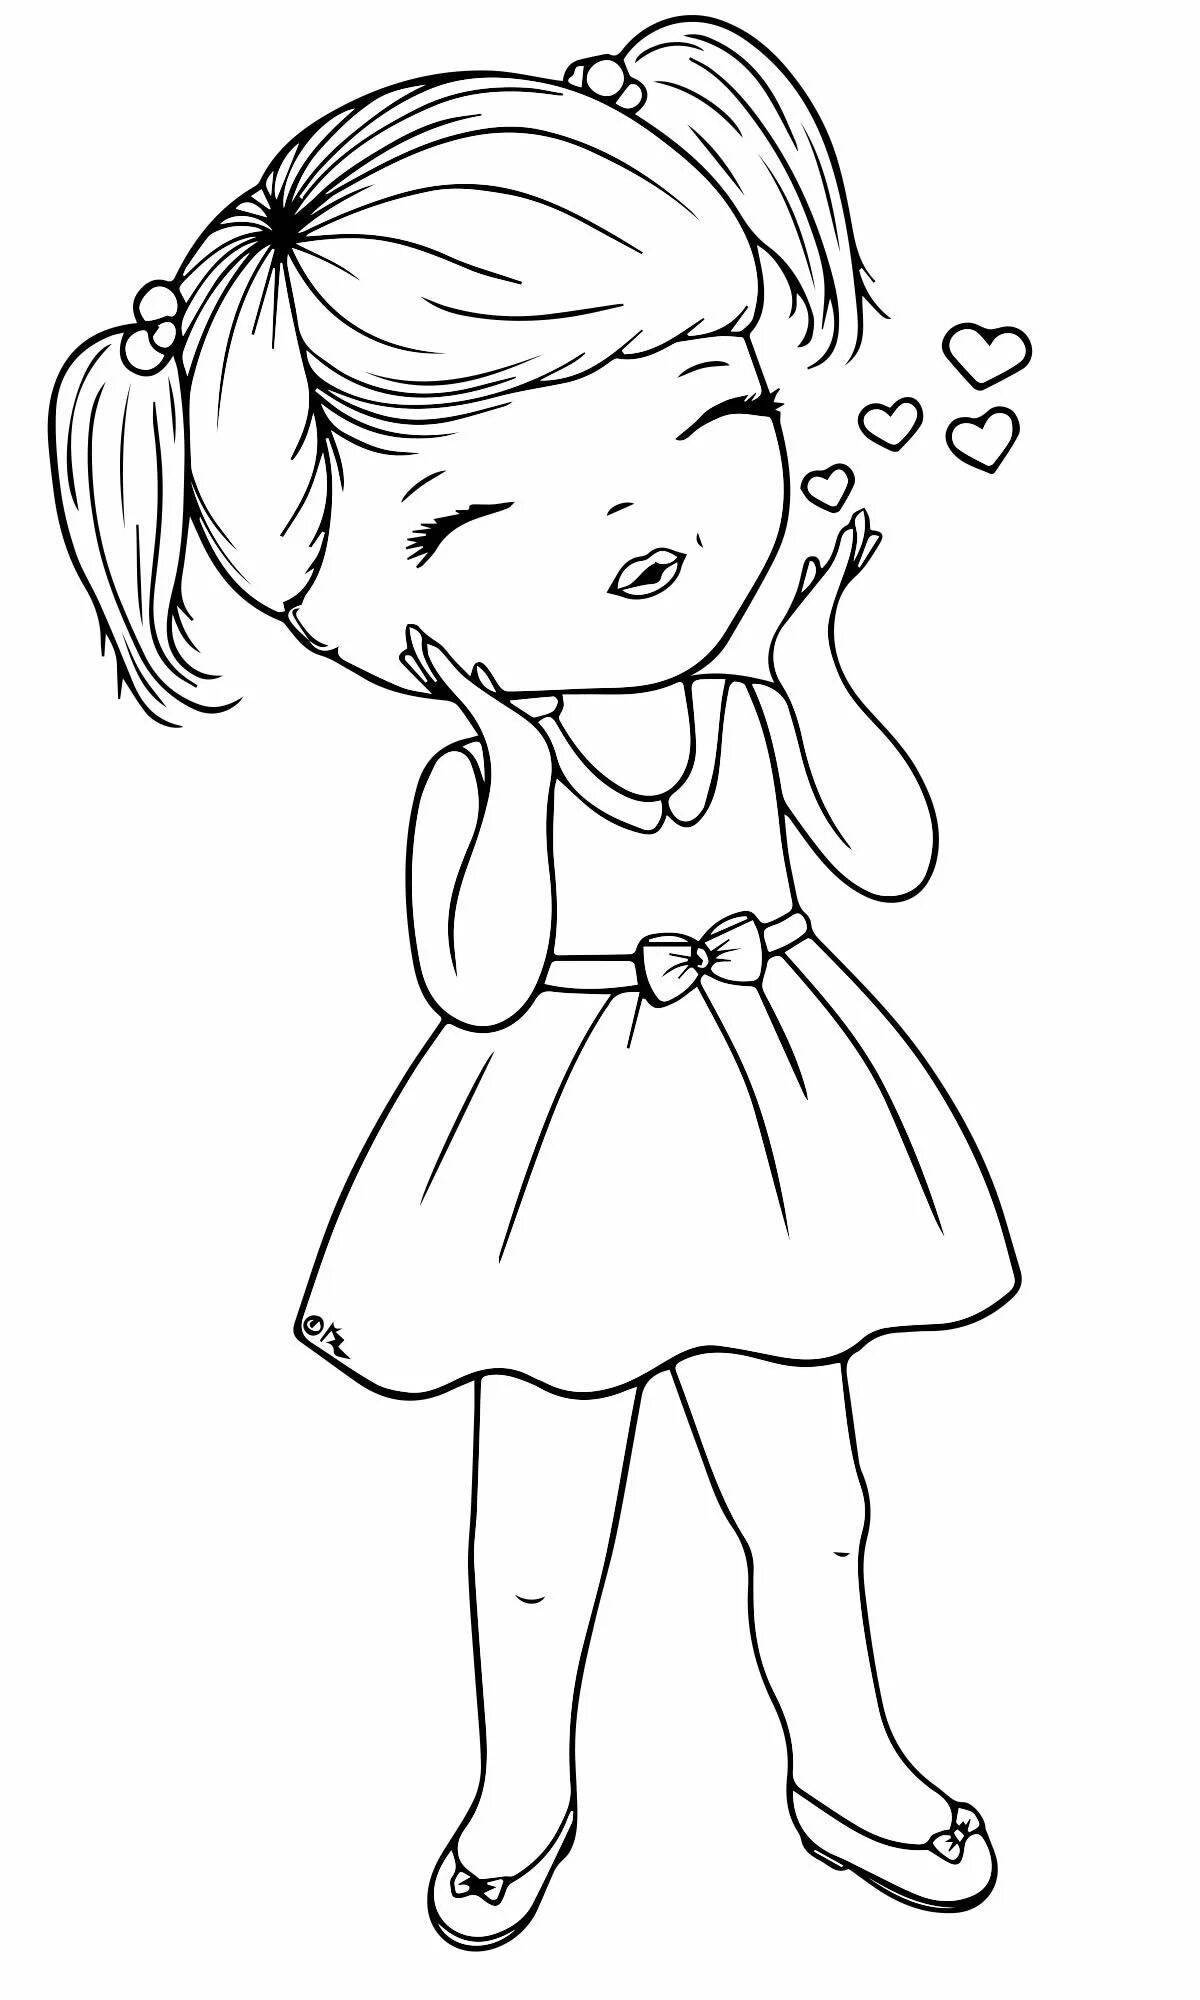 Coloring page energetic standing girl